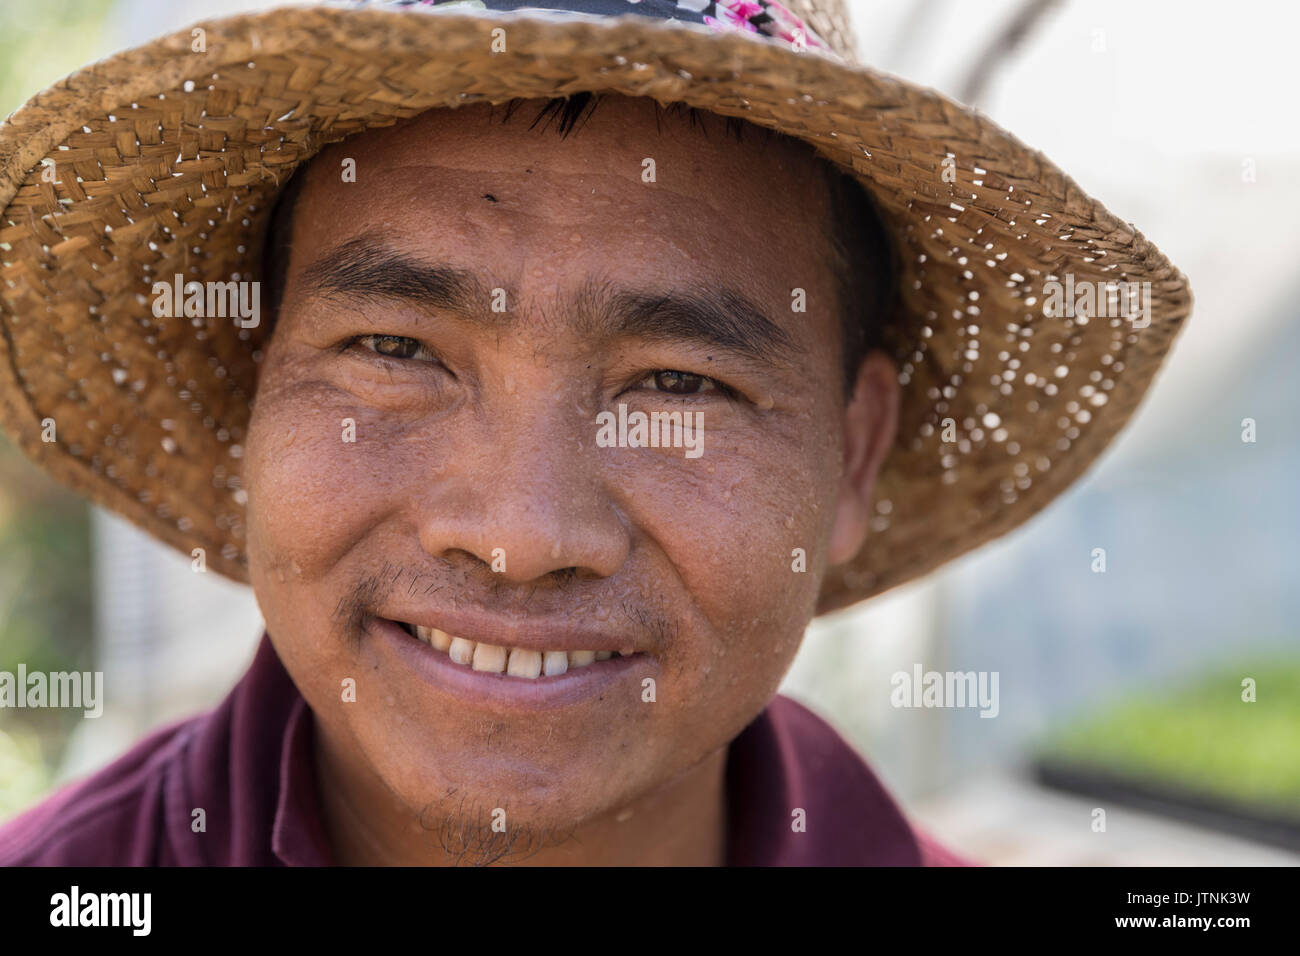 Than Ceu, at Global Growers, and urban farm in Stone Mountain, GA. He is a refugees from Myanmar and uses plots provided by Global Growers. Stock Photo